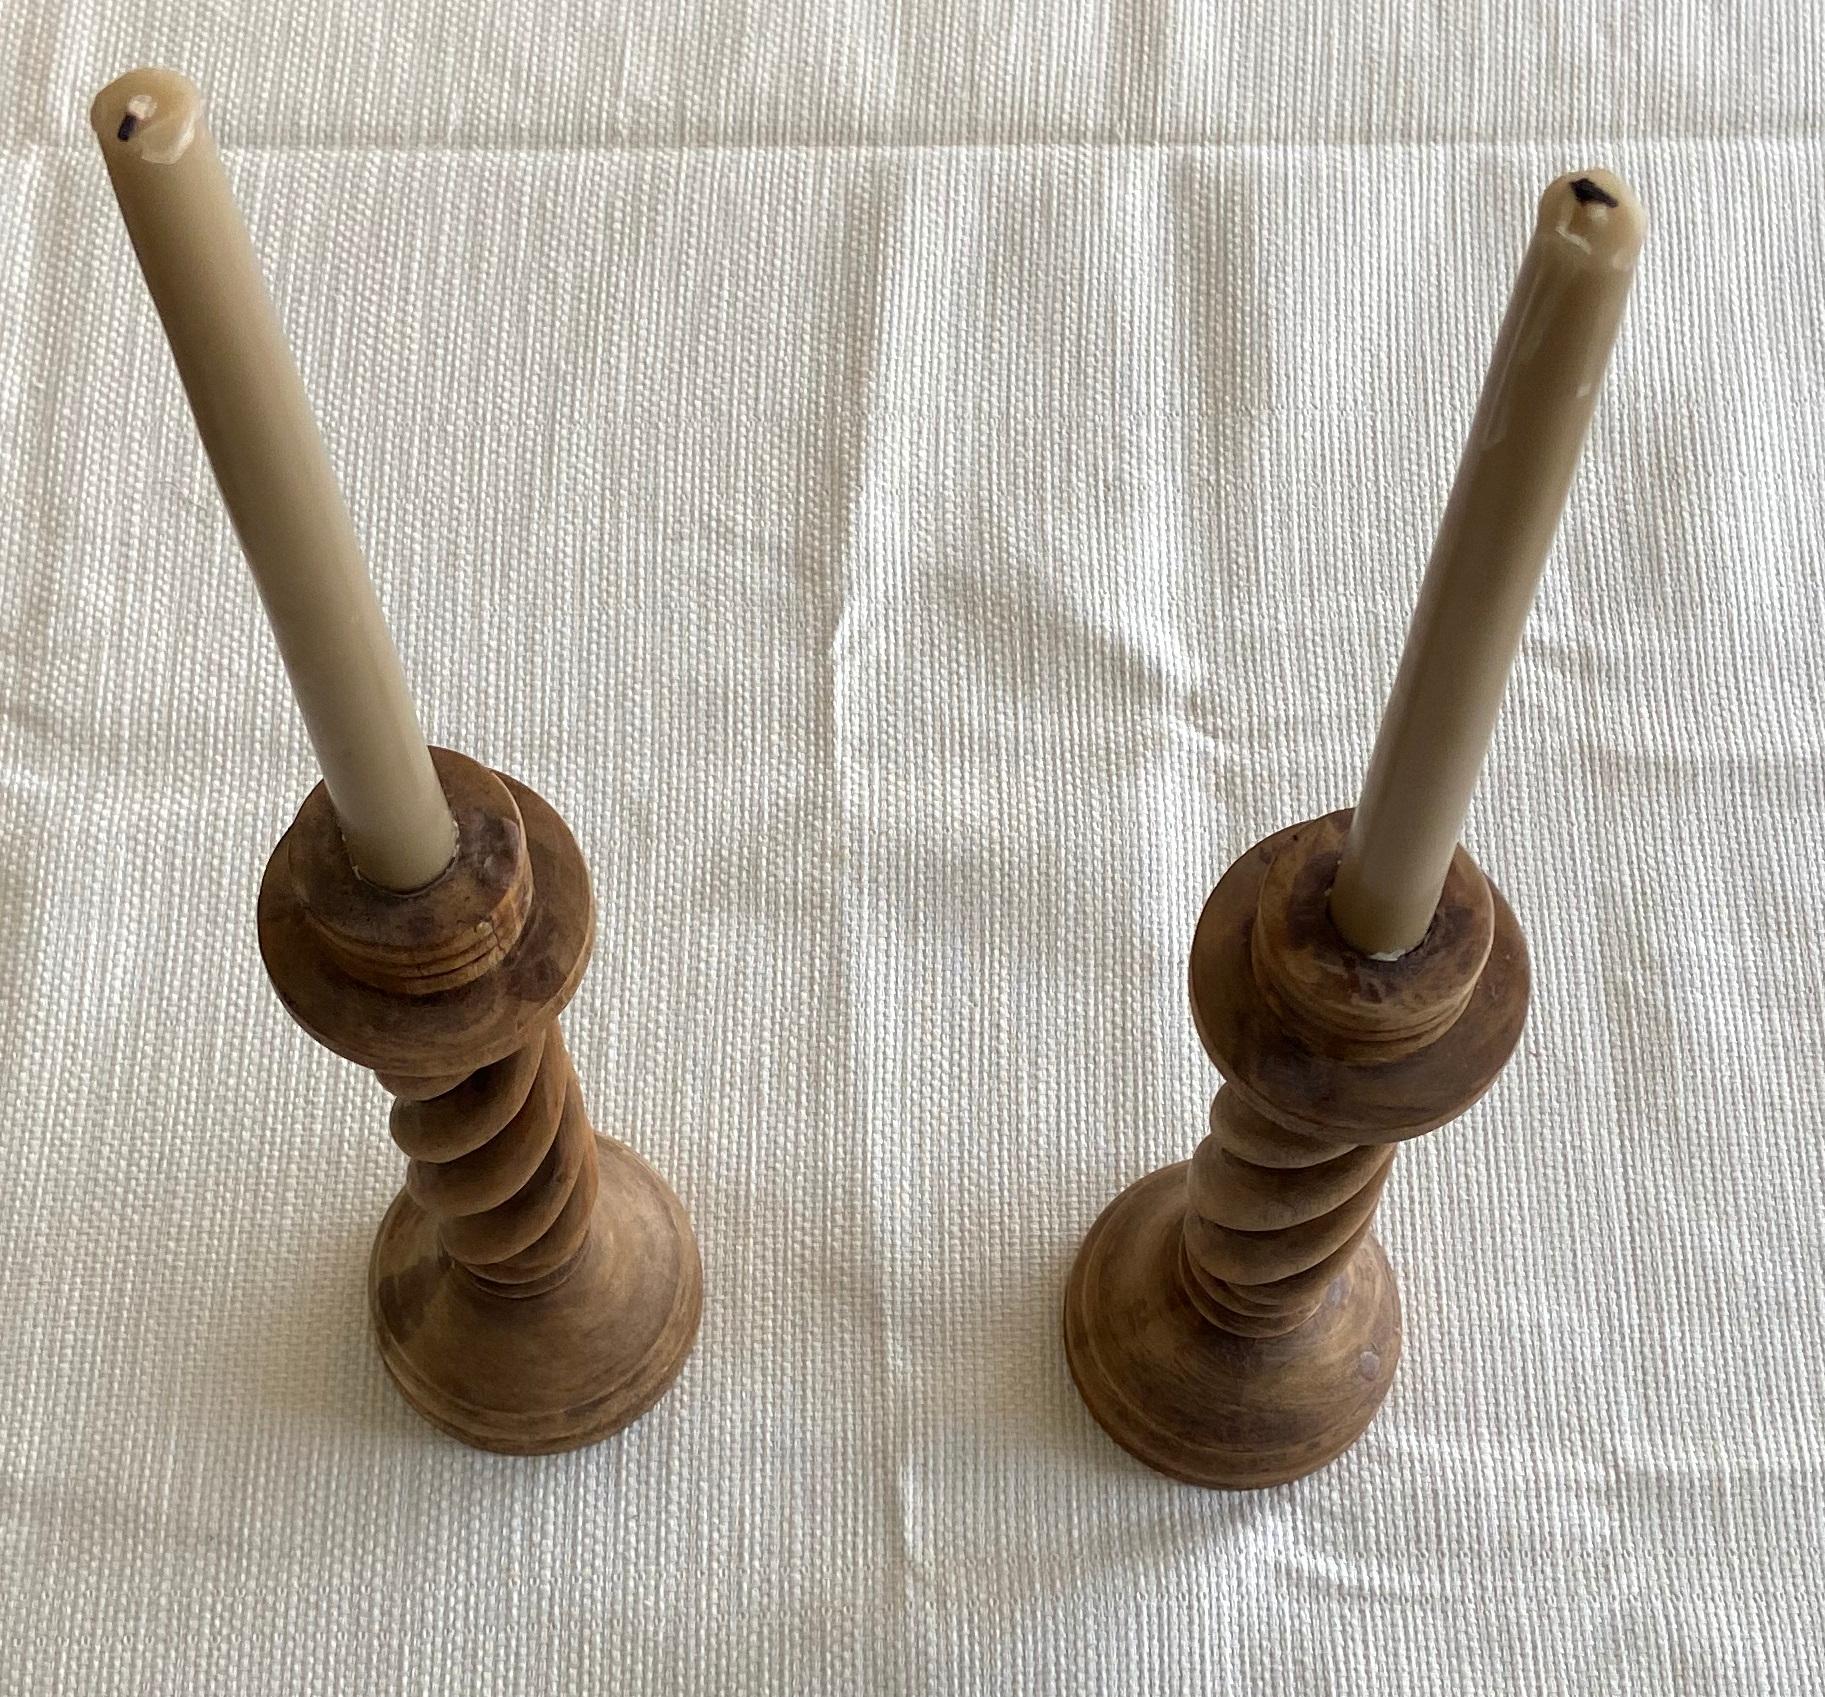 Turned Pair of Wooden Barley Twist Candlesticks